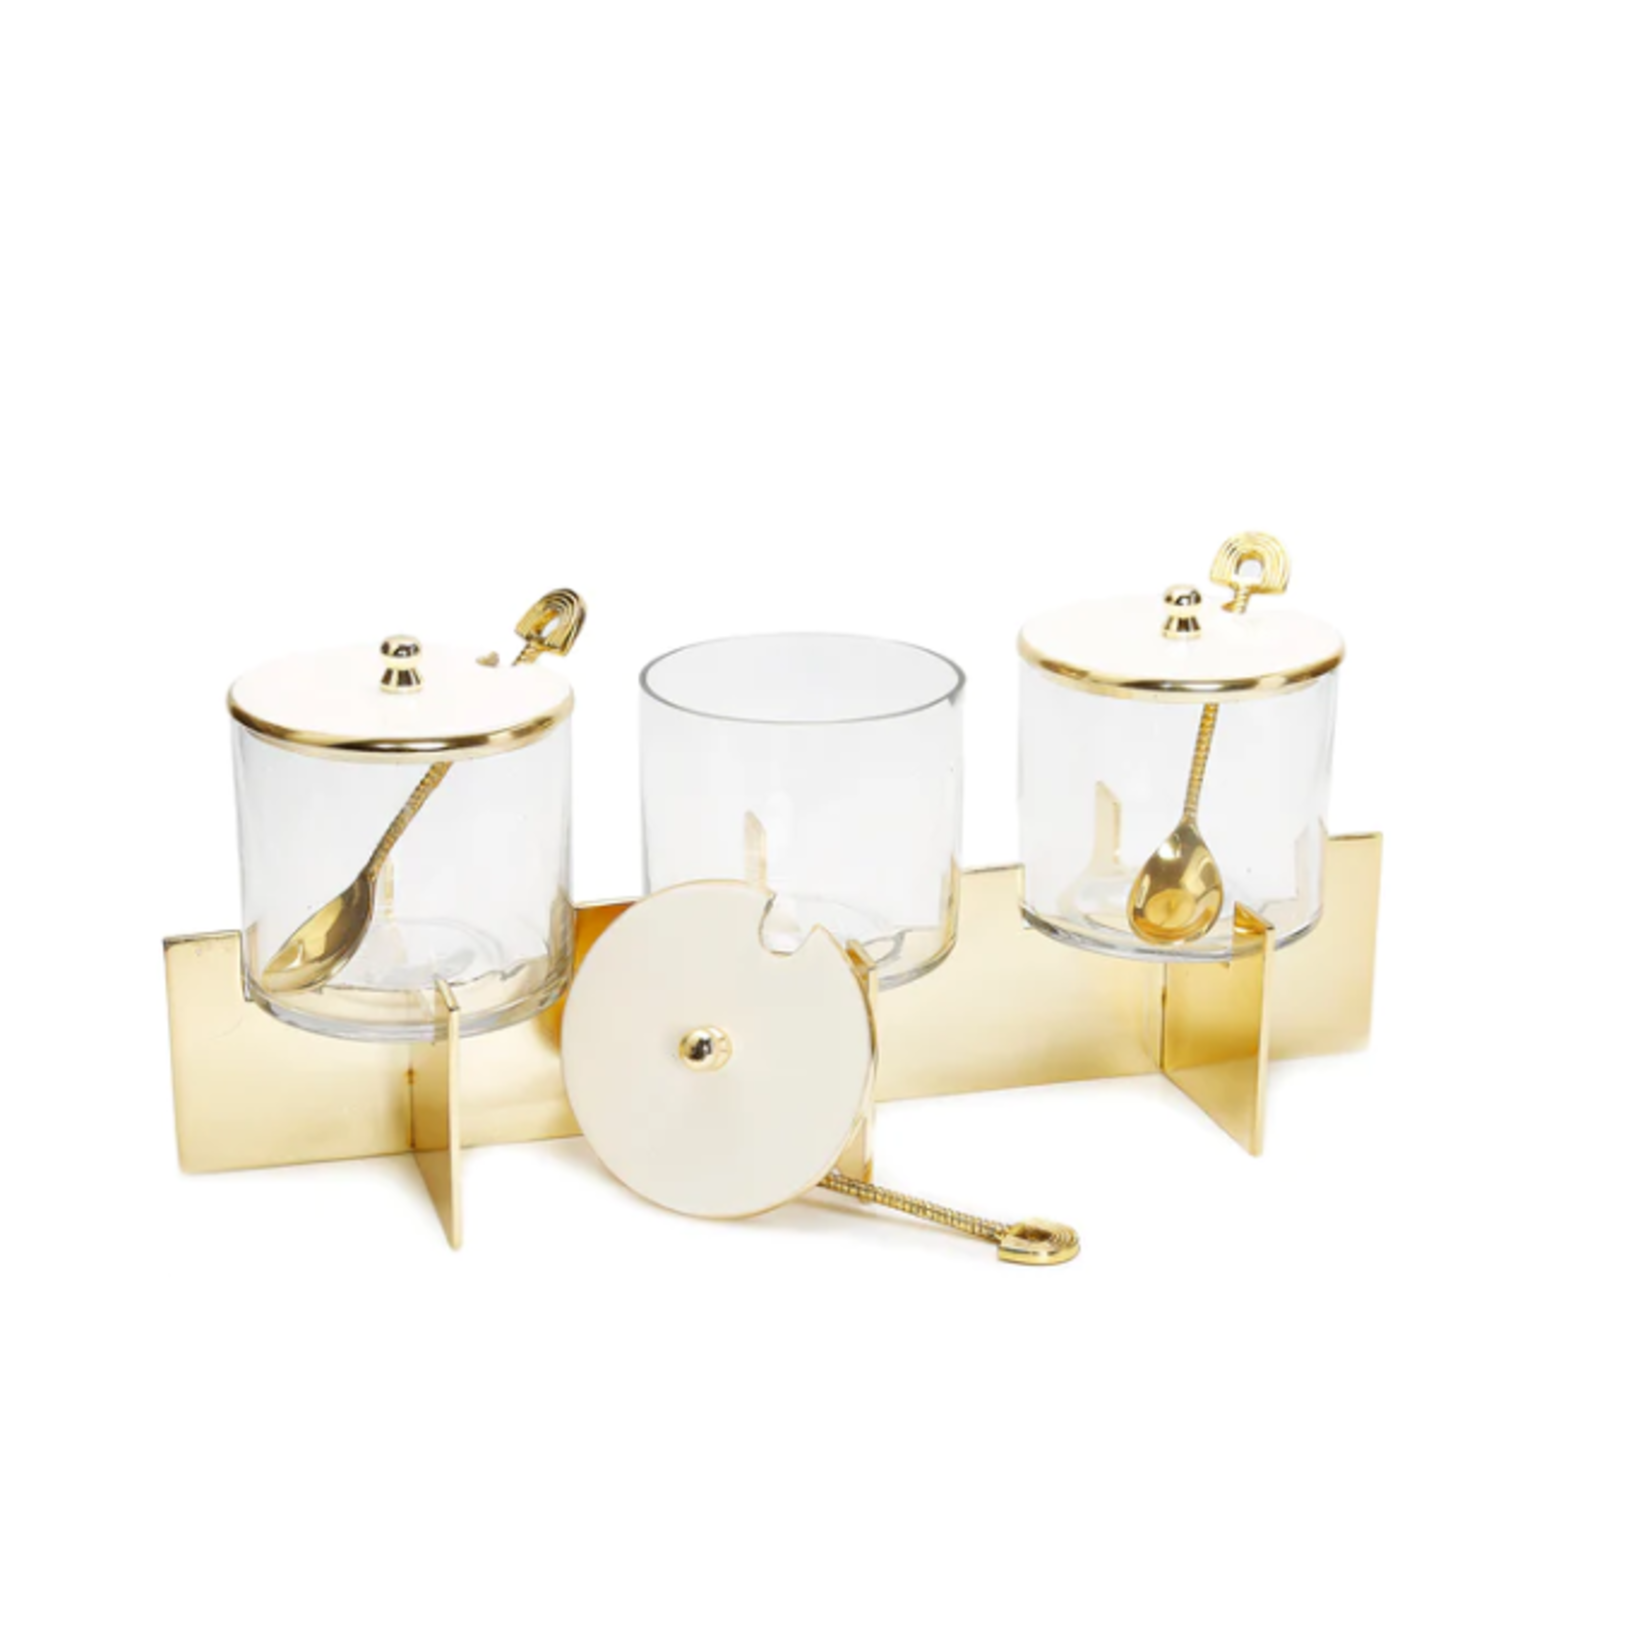 Three Glass Canister Set White Lids Gold Block Base